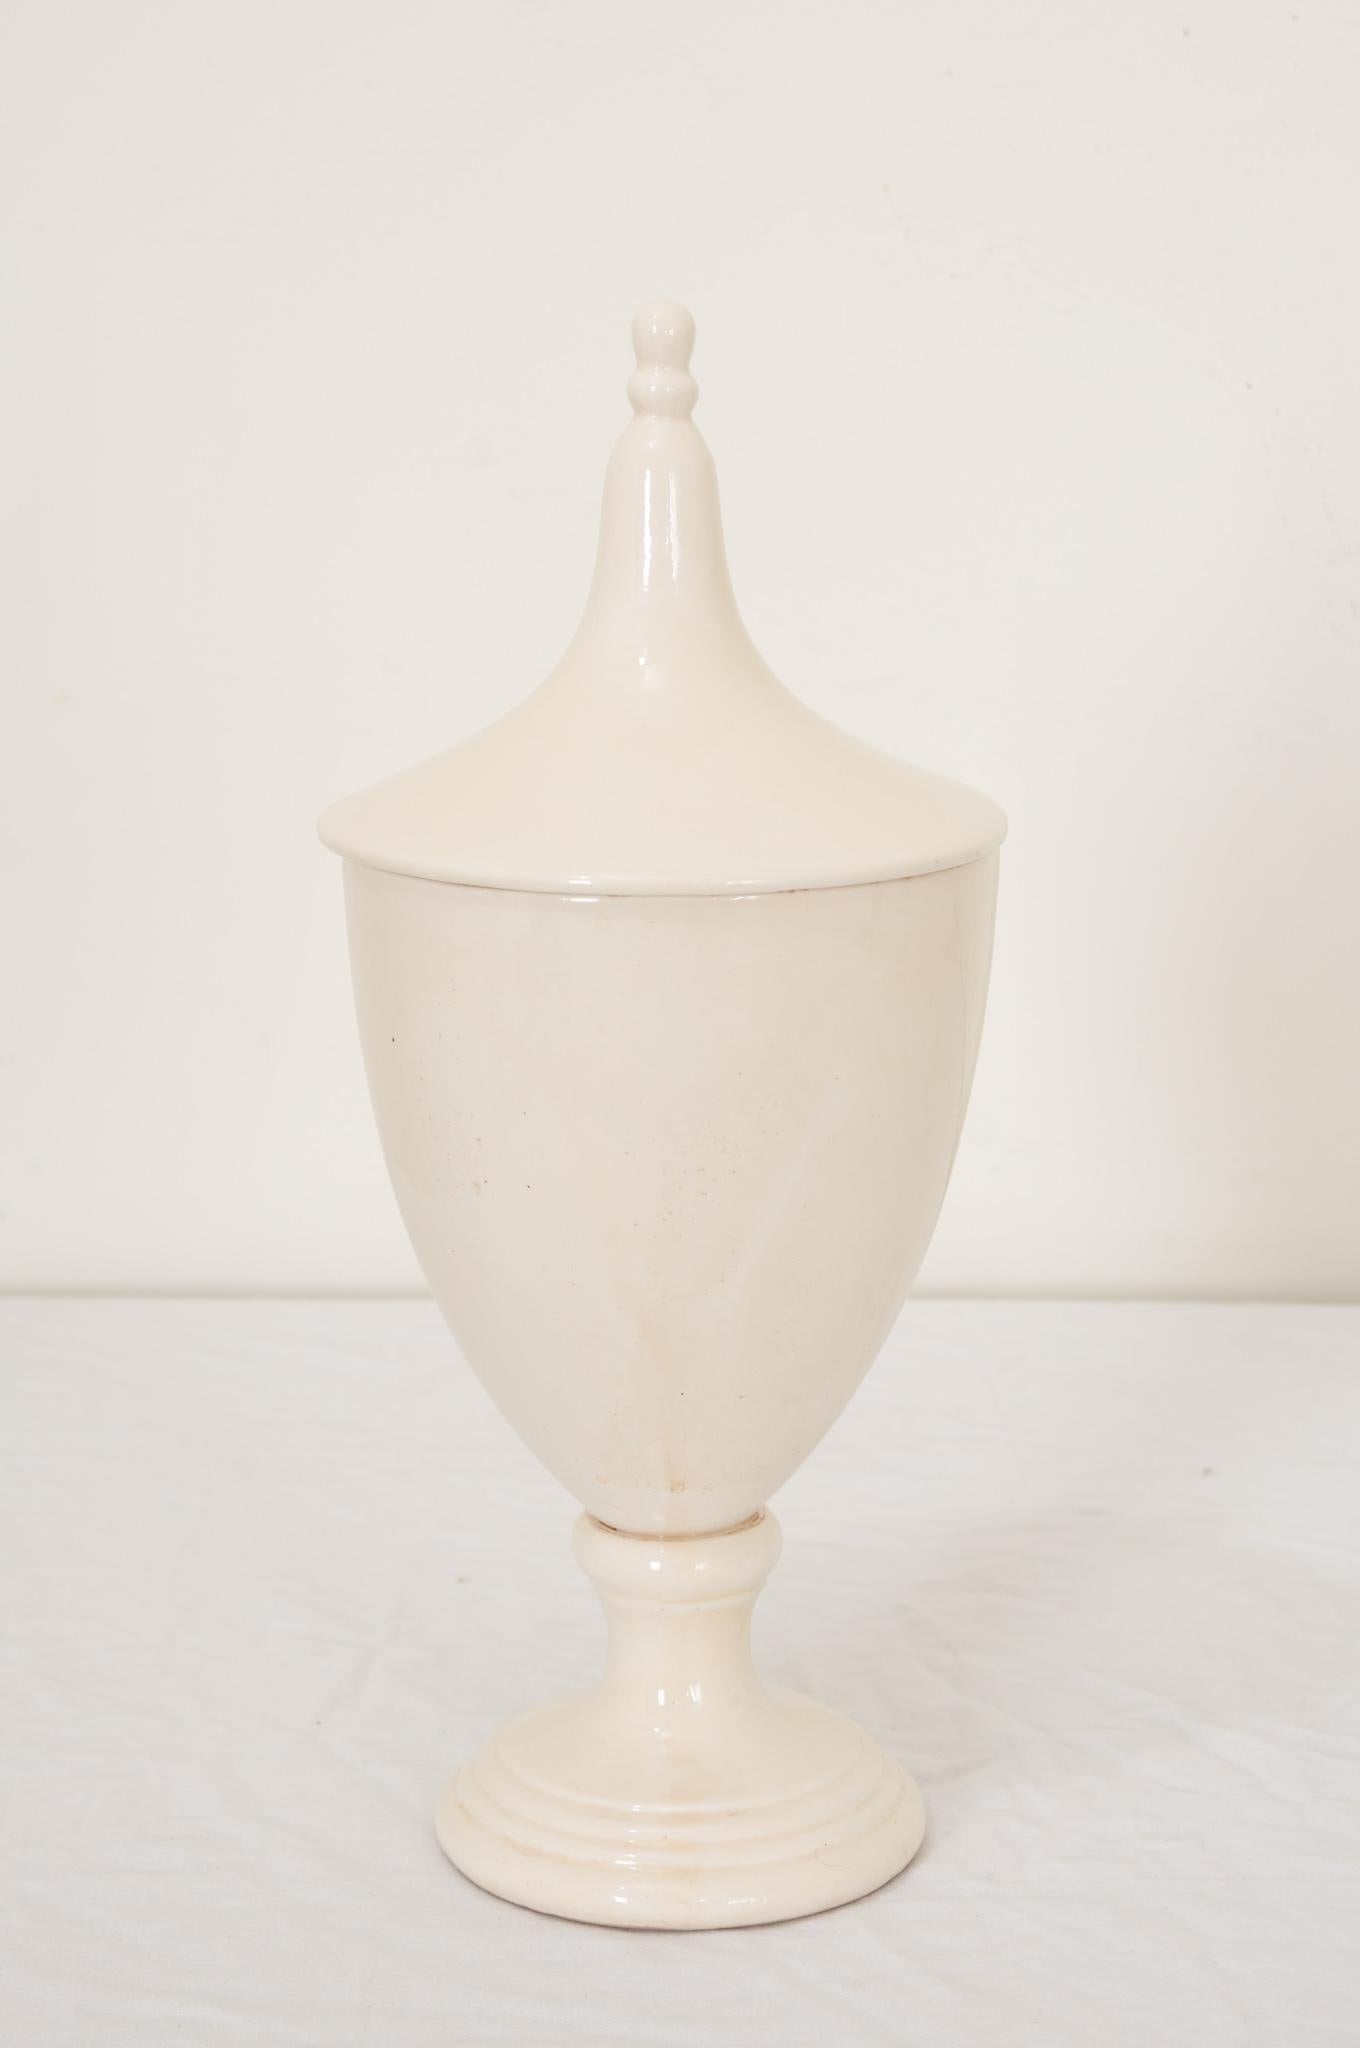 An English 19th Century apothecary or herbalist jar of white ceramic in the shape of a classical urn. Jars were used by apothecaries in pharmacies and dispensaries in hospitals and monasteries. Apothecaries needed containers to store herbs, roots,